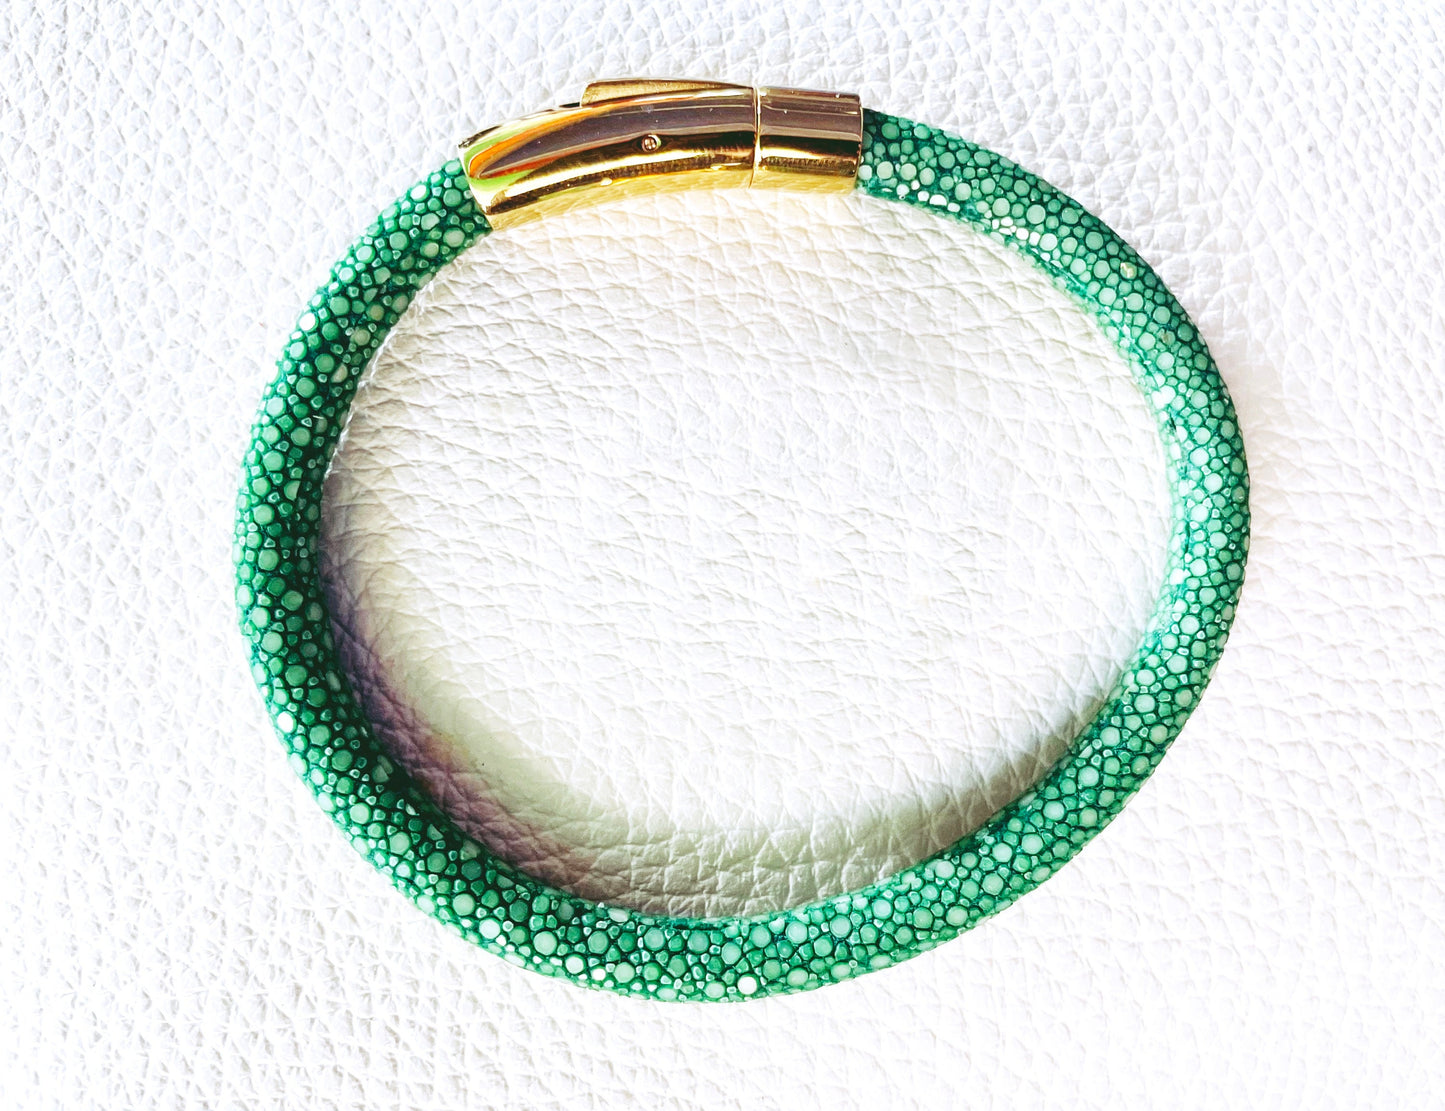 Stingray Leather Bracelet | Green Bracelet | Magnetic Closure Stingray Leather Bracelets| Personalized gifts | Christmas gifts | Gifts for him |Gift For Her